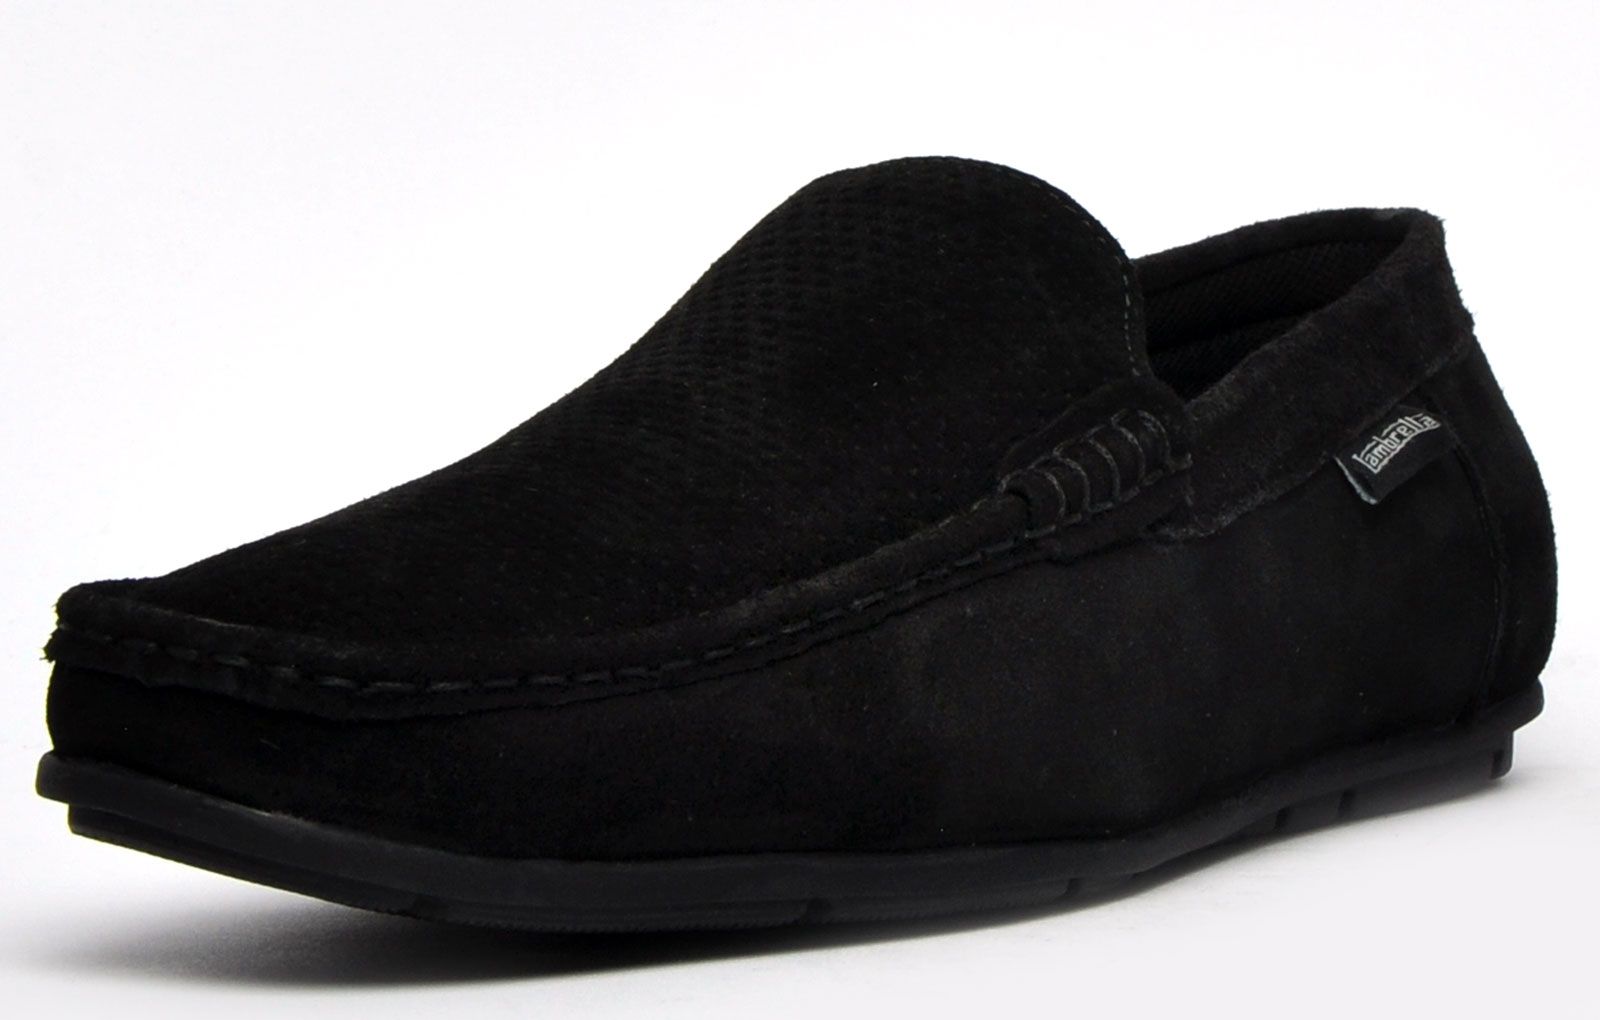 An essential for the fashion-conscious gent, these Scoot mens Lambretta suede leather loafers are a true wardrobe staple. Boasting effortless charm, these mens slip-ons are presented in a black suede leather upper ensuring a quality finish that will compliment any outfit. A hardwearing rubber outsole ensures grip and durability on a variety of surfaces, ensuring long lasting wear that wont let you down.
 Versatile in nature, the Scoot can be easily dressed up for those more formal occasions or teamed up with any smart casual attire for the ultimate sophisticated look.
 - Premium suede leather upper
 - Designer stitch detailing throughout 
 - Durable grippy outsole 
 - Easy slip on / off